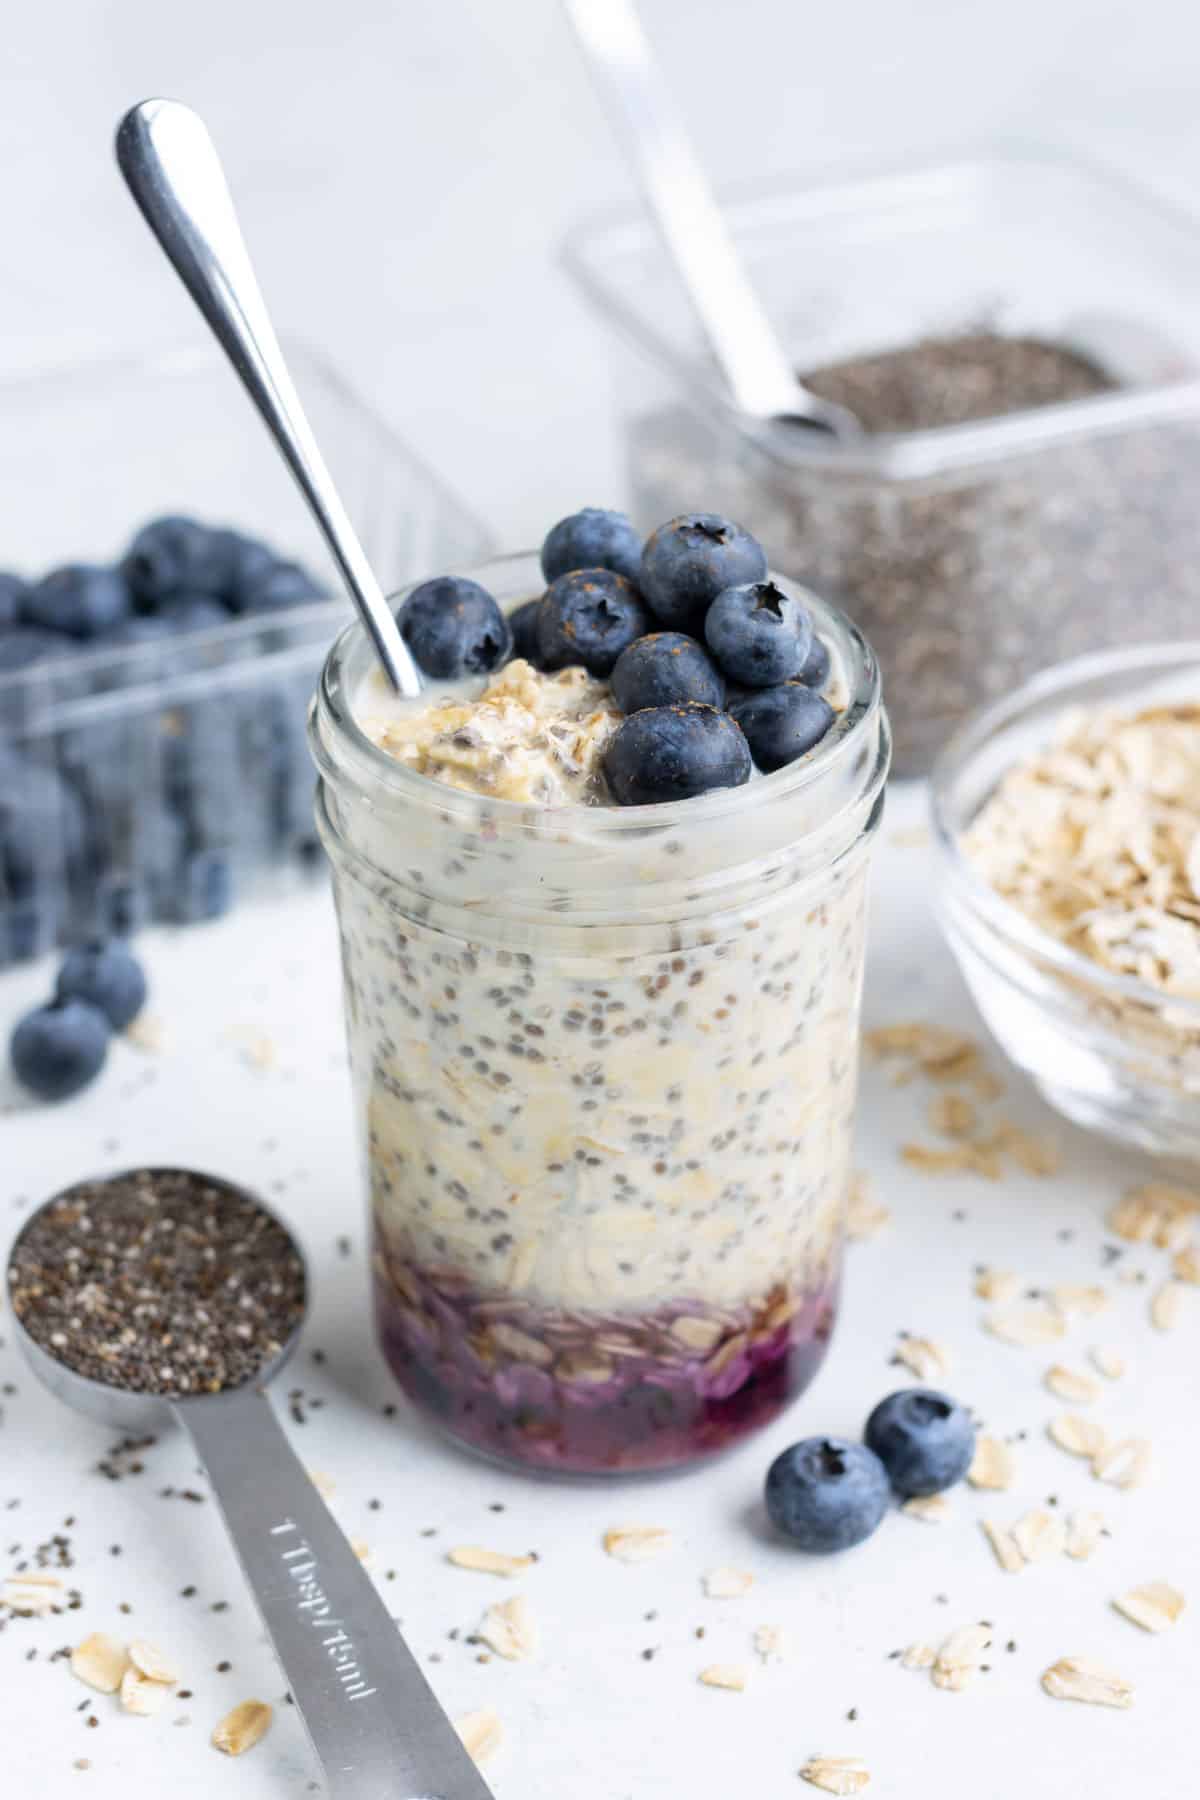 A serving of gluten-free overnight oats with yogurt for a healthy breakfast.